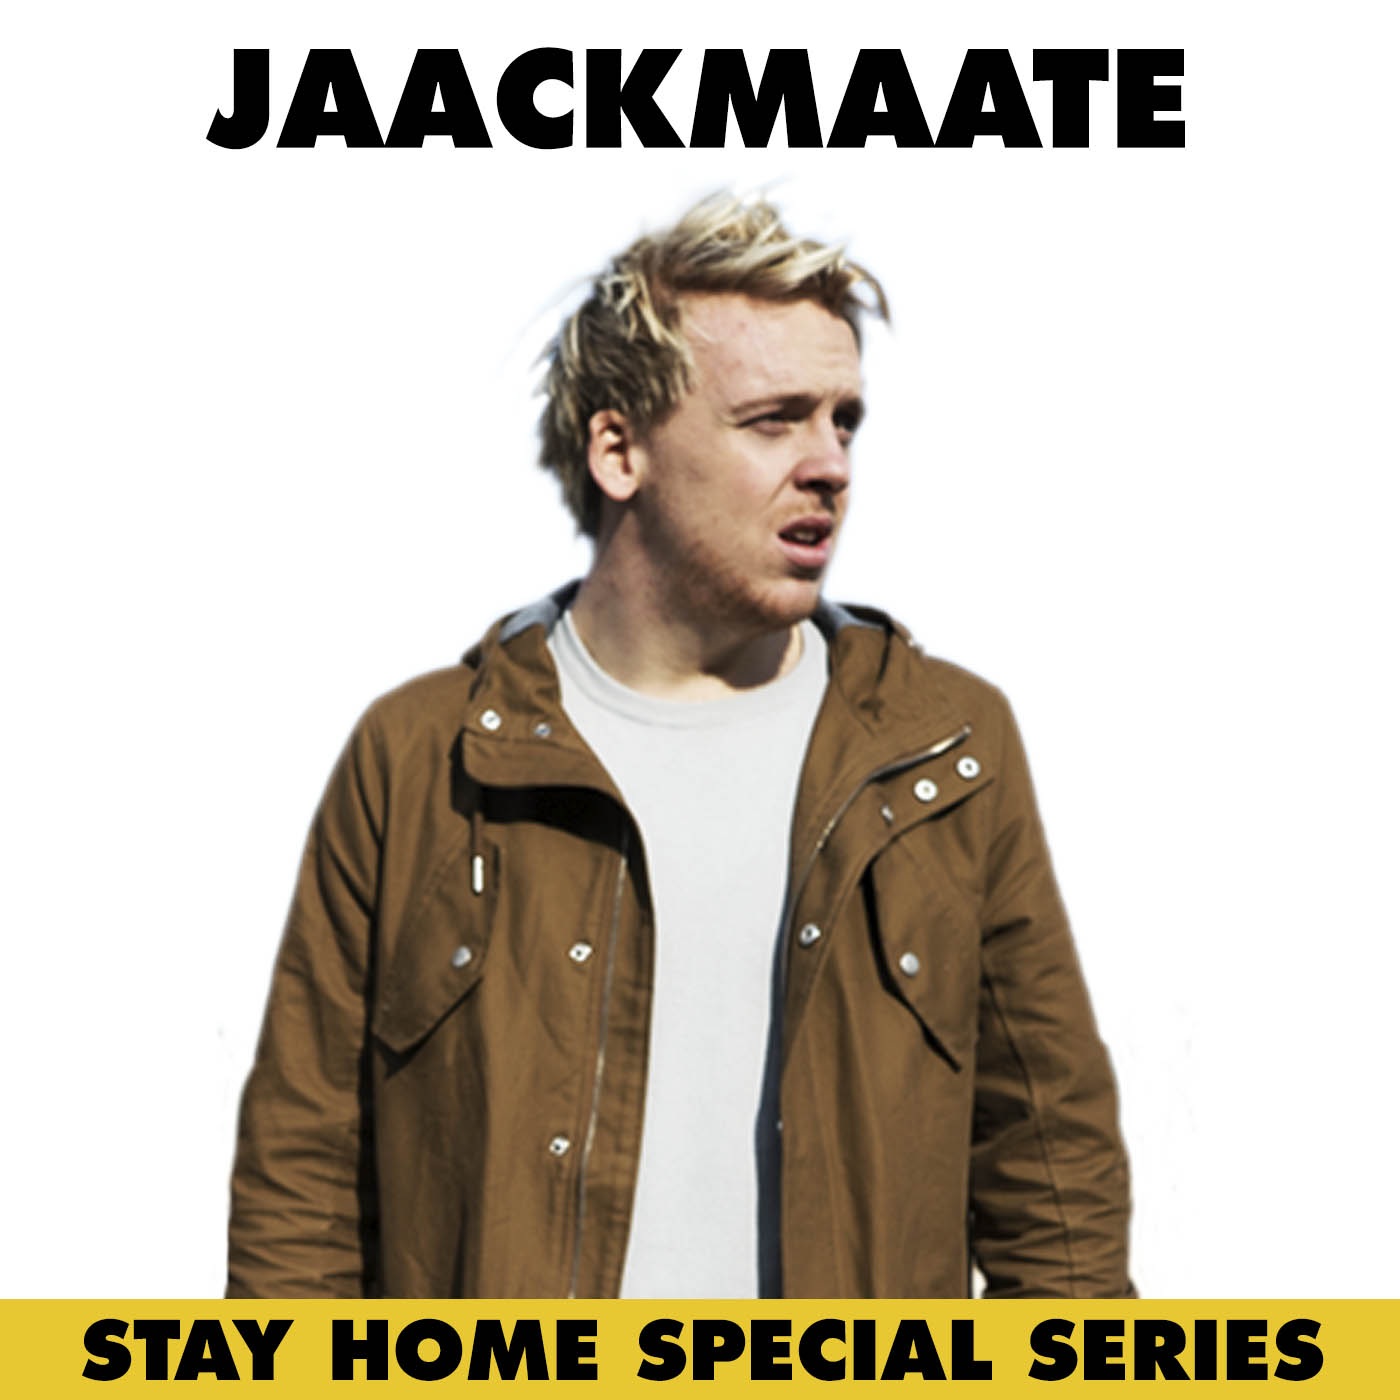 JaackMaate s Stay Home Special